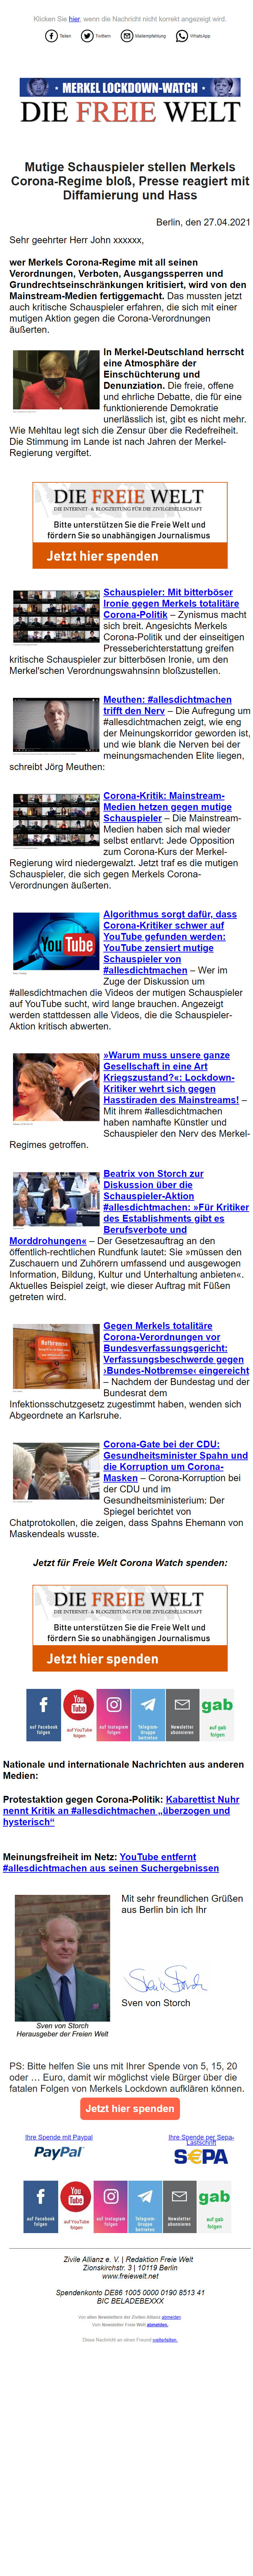 An email newsletter by Freie Welt